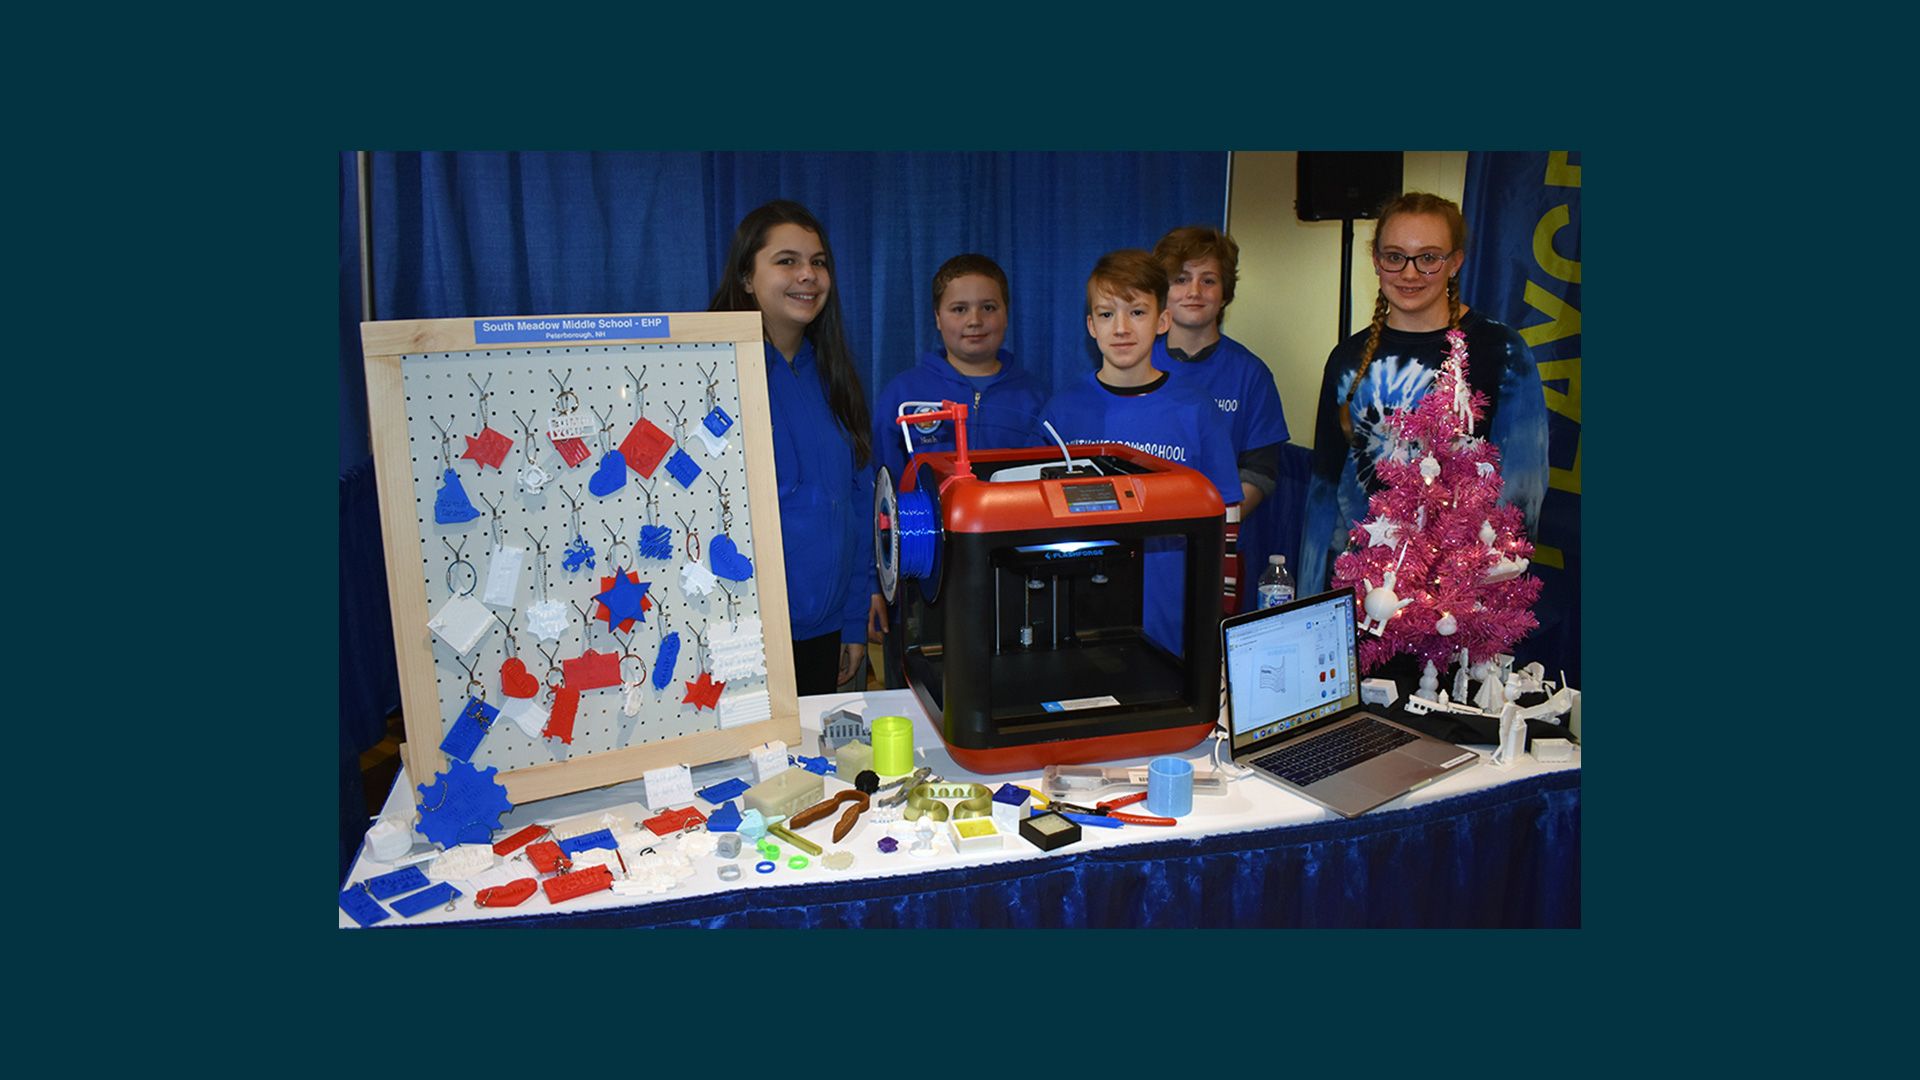 Students showcasing their 3D printed creations at a conference.